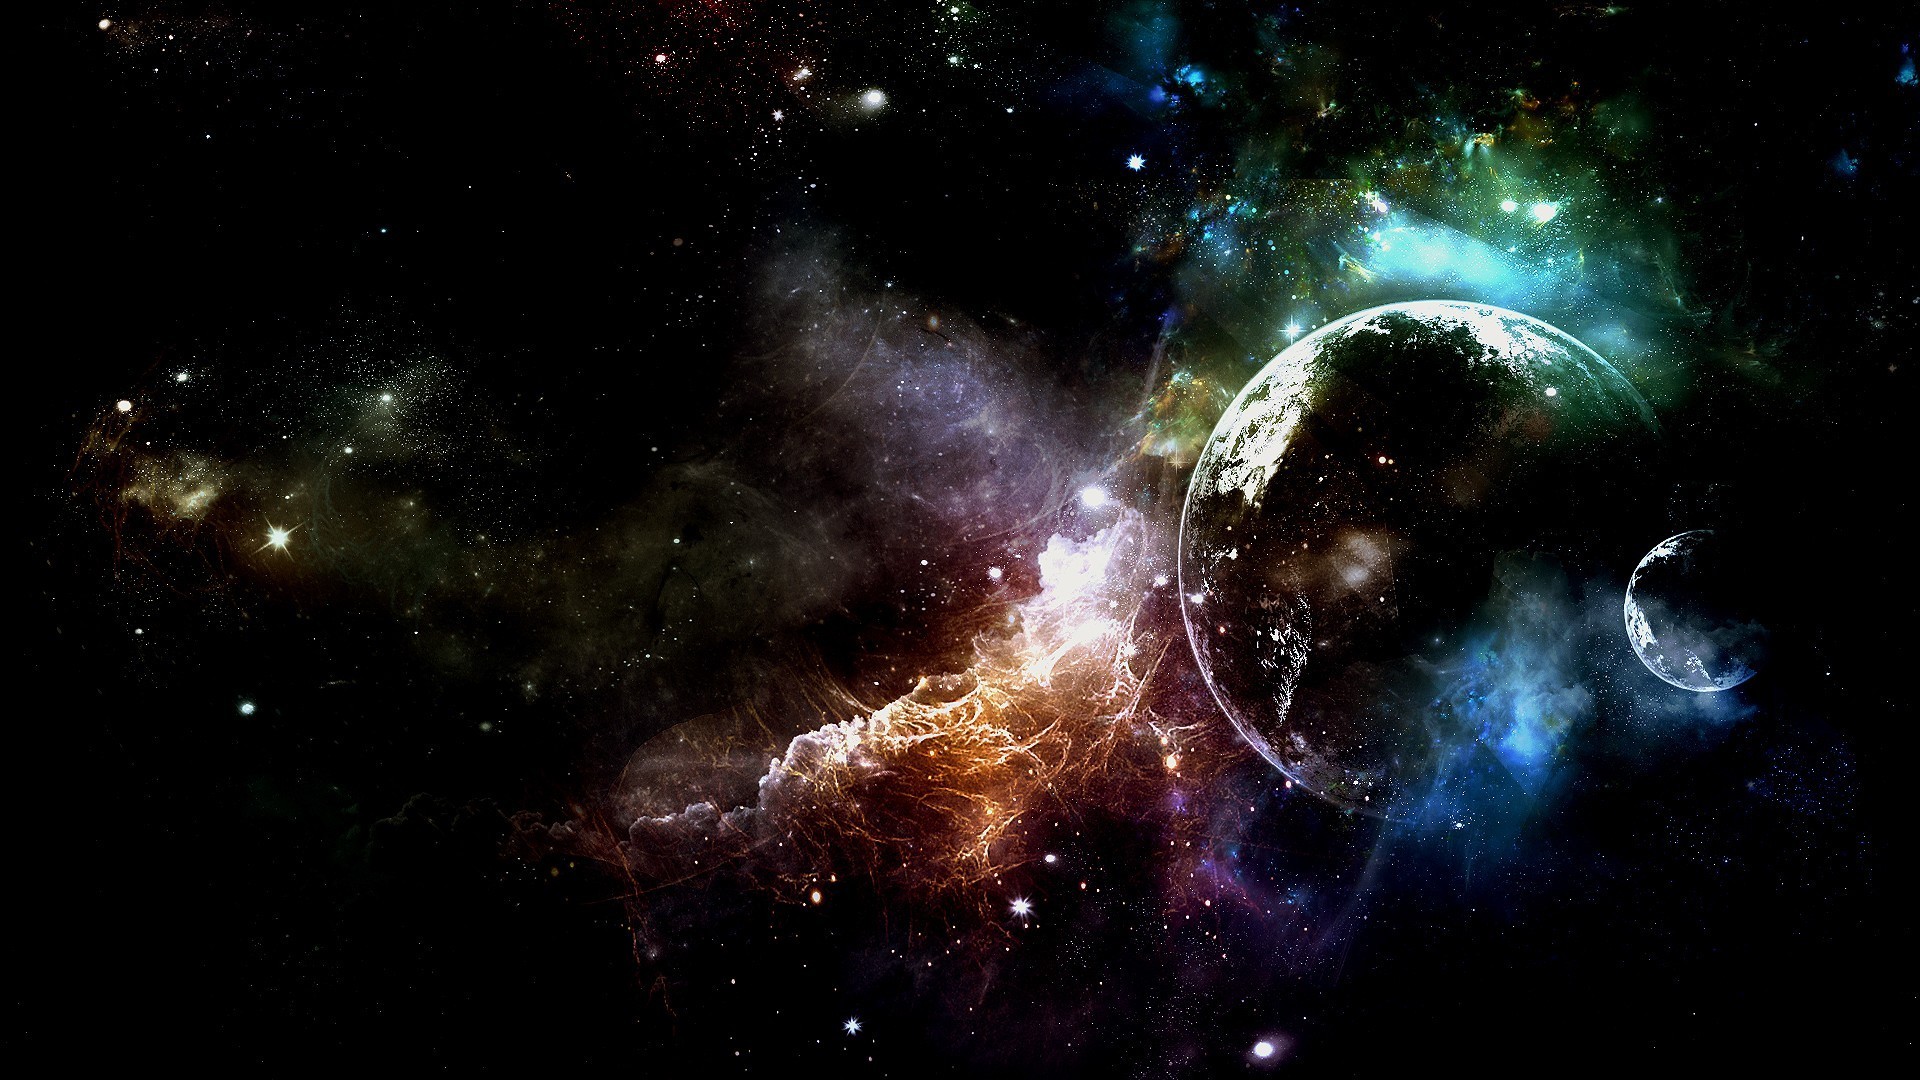 Space Wallpapers in HD taken somewere in our universe